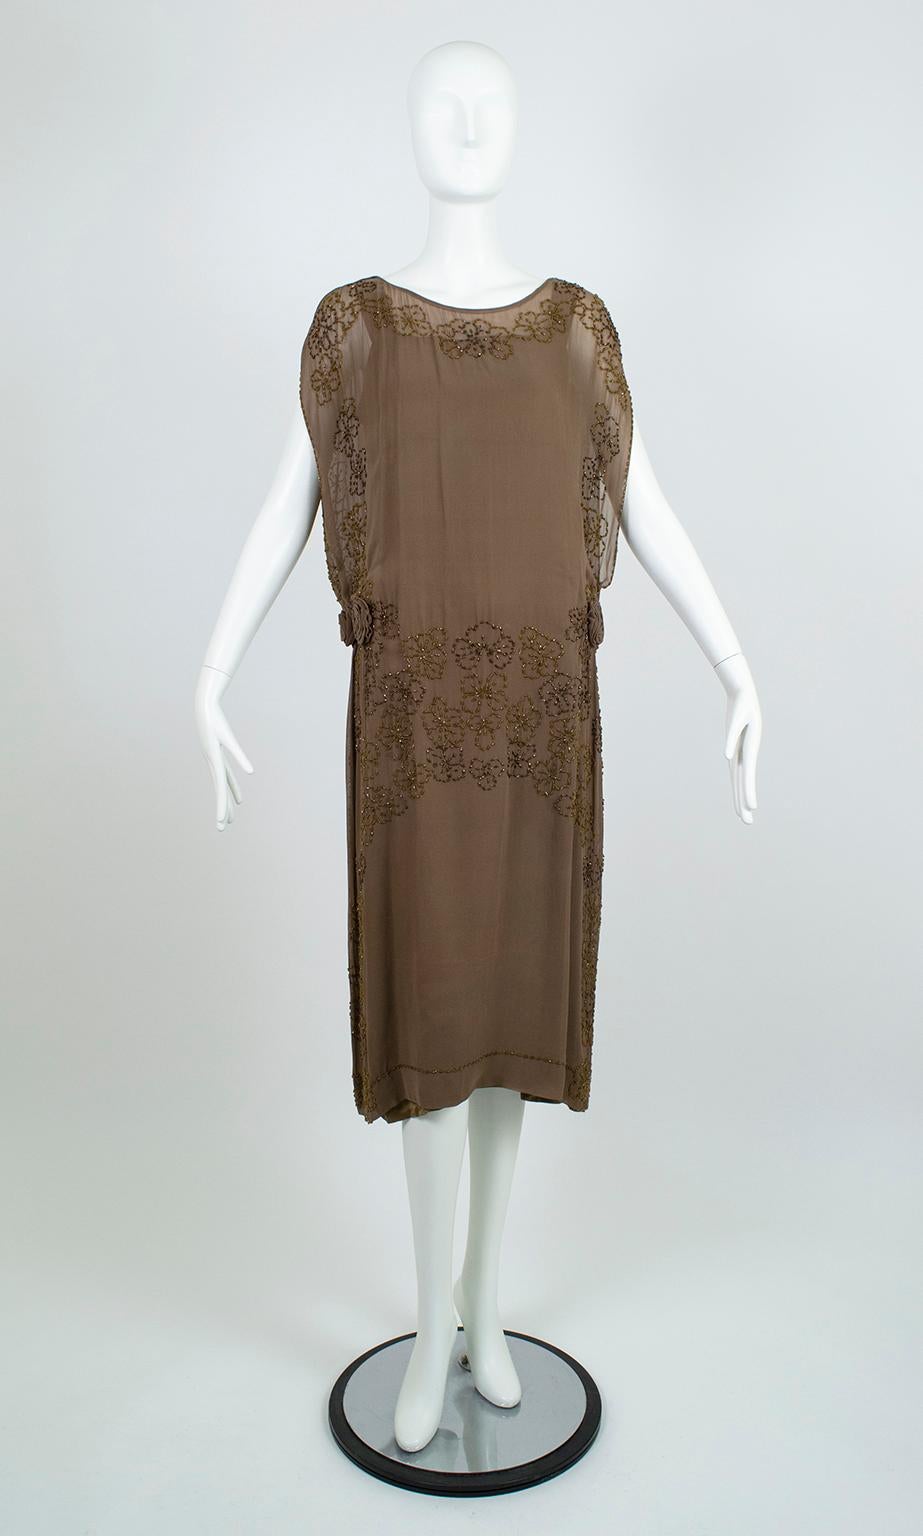 From the estate of department store heiress Estela Jácome, this exceptional early 20s dress is the epitome of alluring modesty. Despite its sensual hip rosettes, high-split tabard sides and deep arm holes, the wearer remains fully covered thanks to